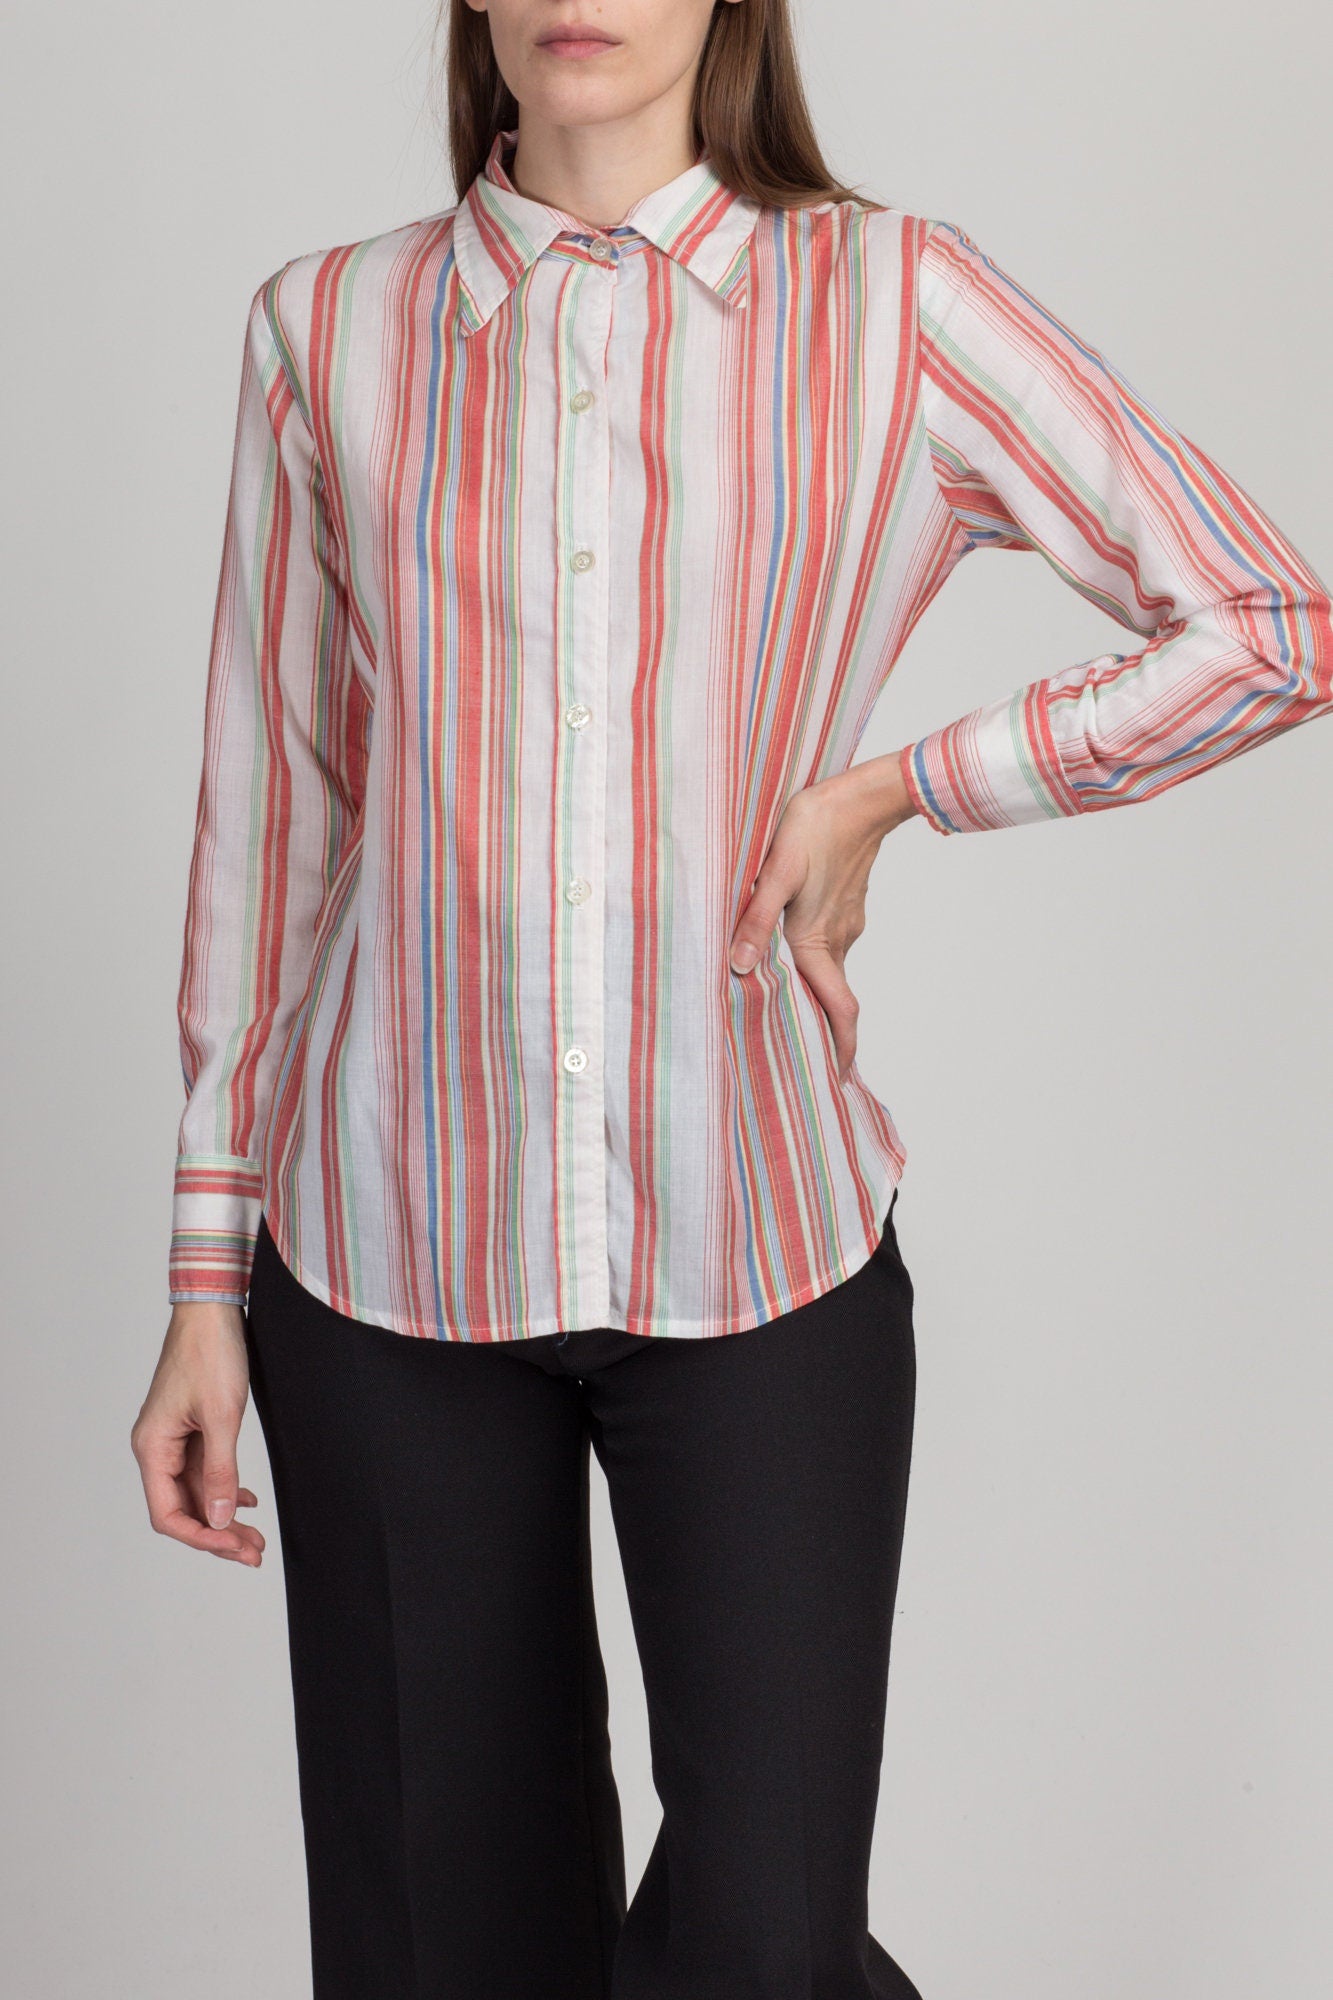 70s Candy Striped Button Up Top - Small 